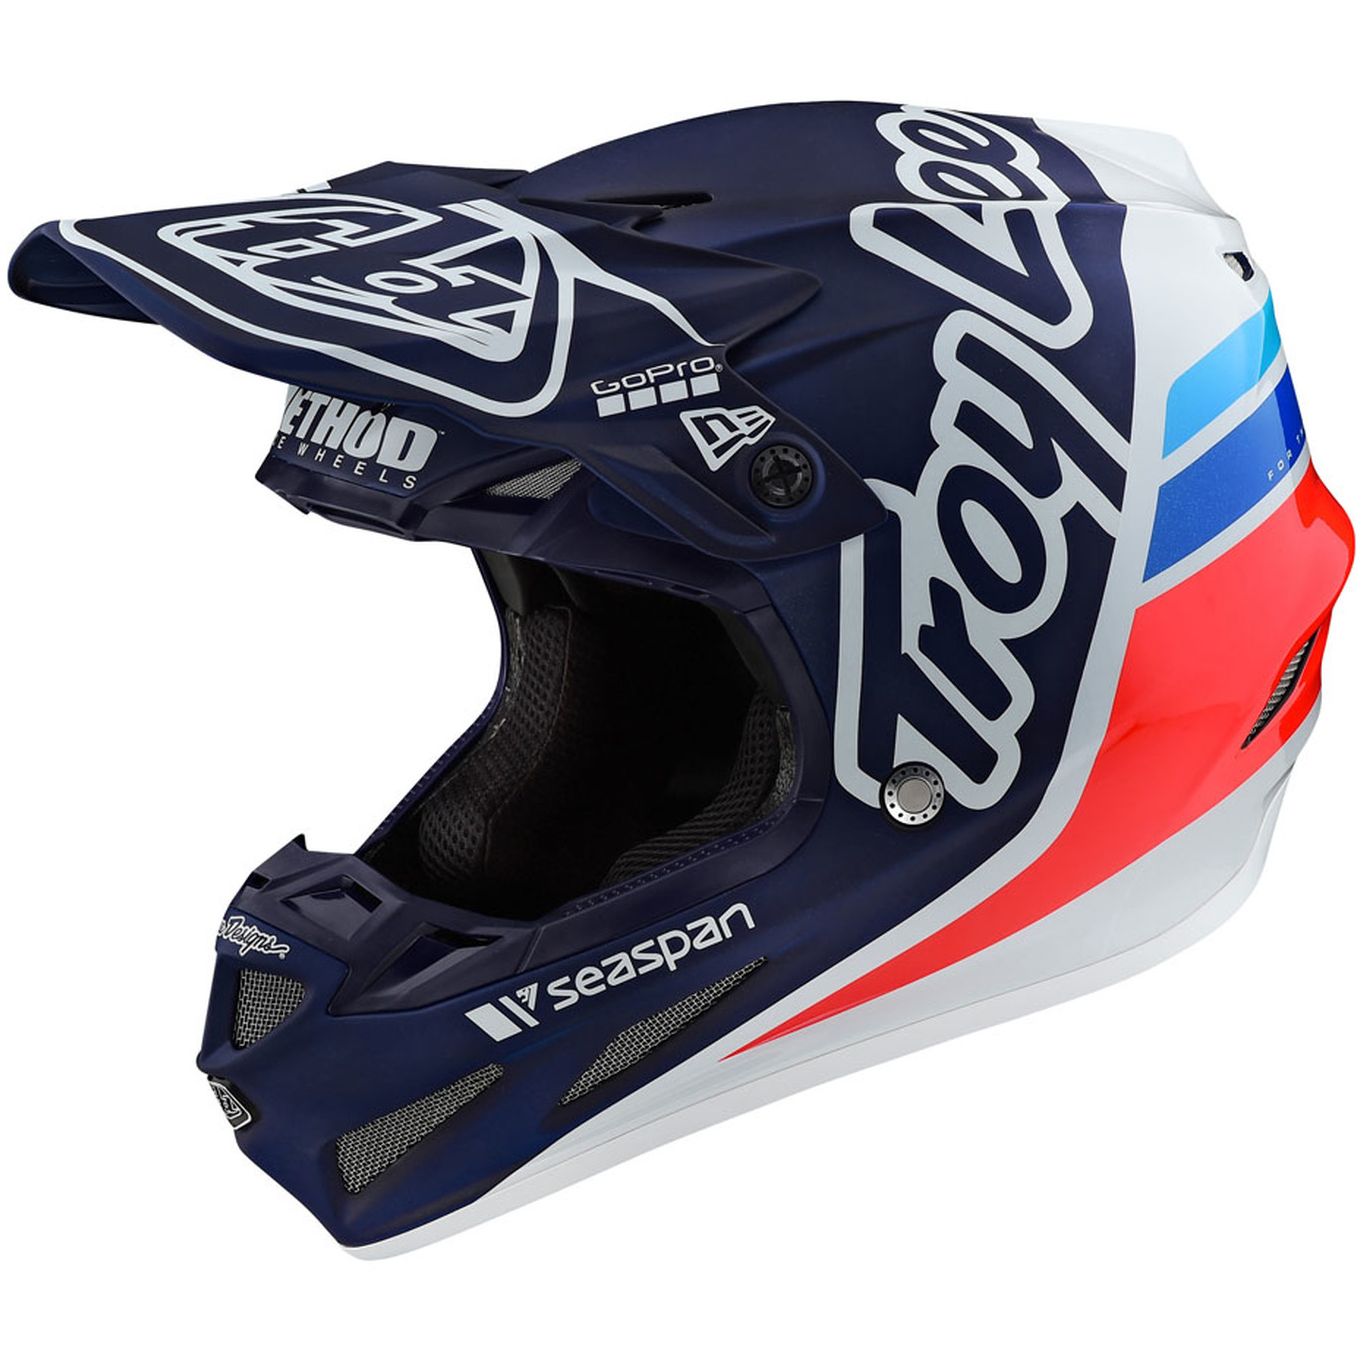 Image of Casque cross TroyLee design SE4 COMPOSITE W/MIPS - SILHOUETTE TEAM - NAVY WHITE 2020